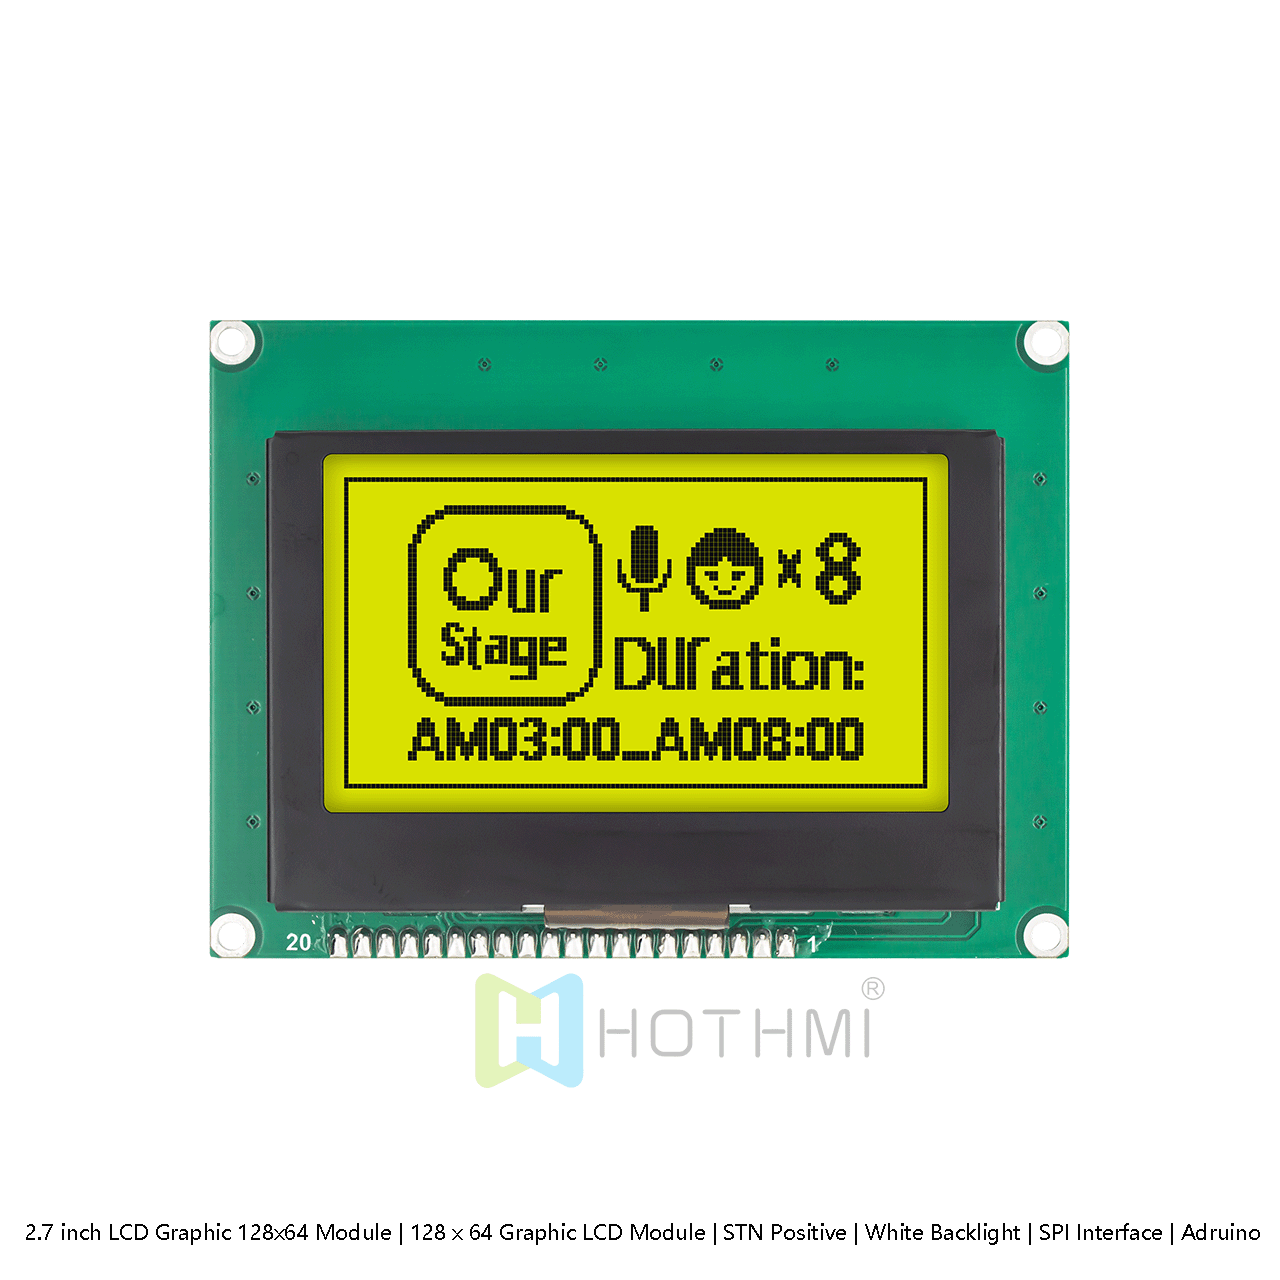 2.7 inch Graphic LCD 128x64 Module | 128 x 64 Graphic LCD | STN Positive | Yellow-green Backlight | SPI Interface